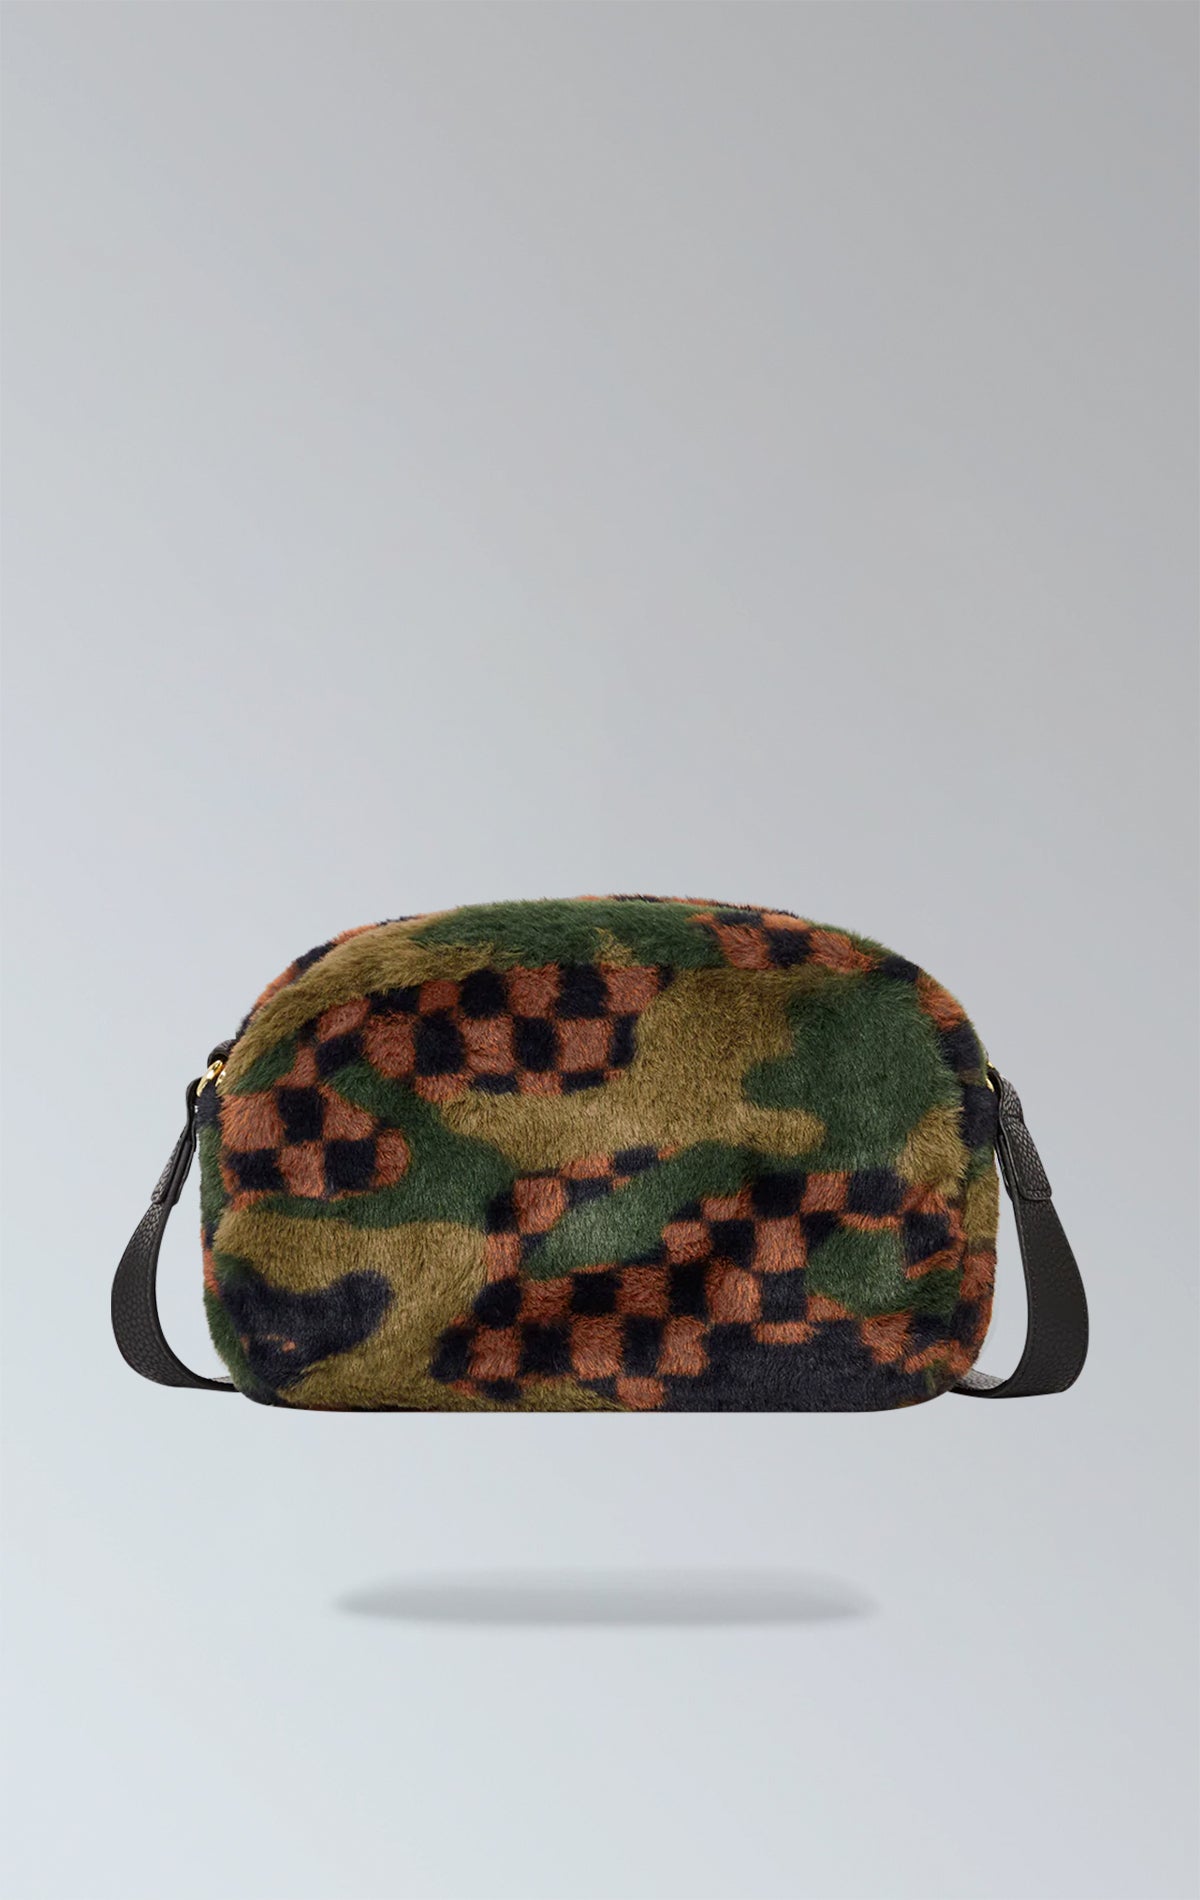 Sprayground camouflage crossbody bag with faux fur details, featuring two zippered compartments, a side handle, gunmetal zippers with metal hardware, a water-resistant interior pocket, and easy-to-clean nylon fabric. Made from durable water-resistant faux leather.